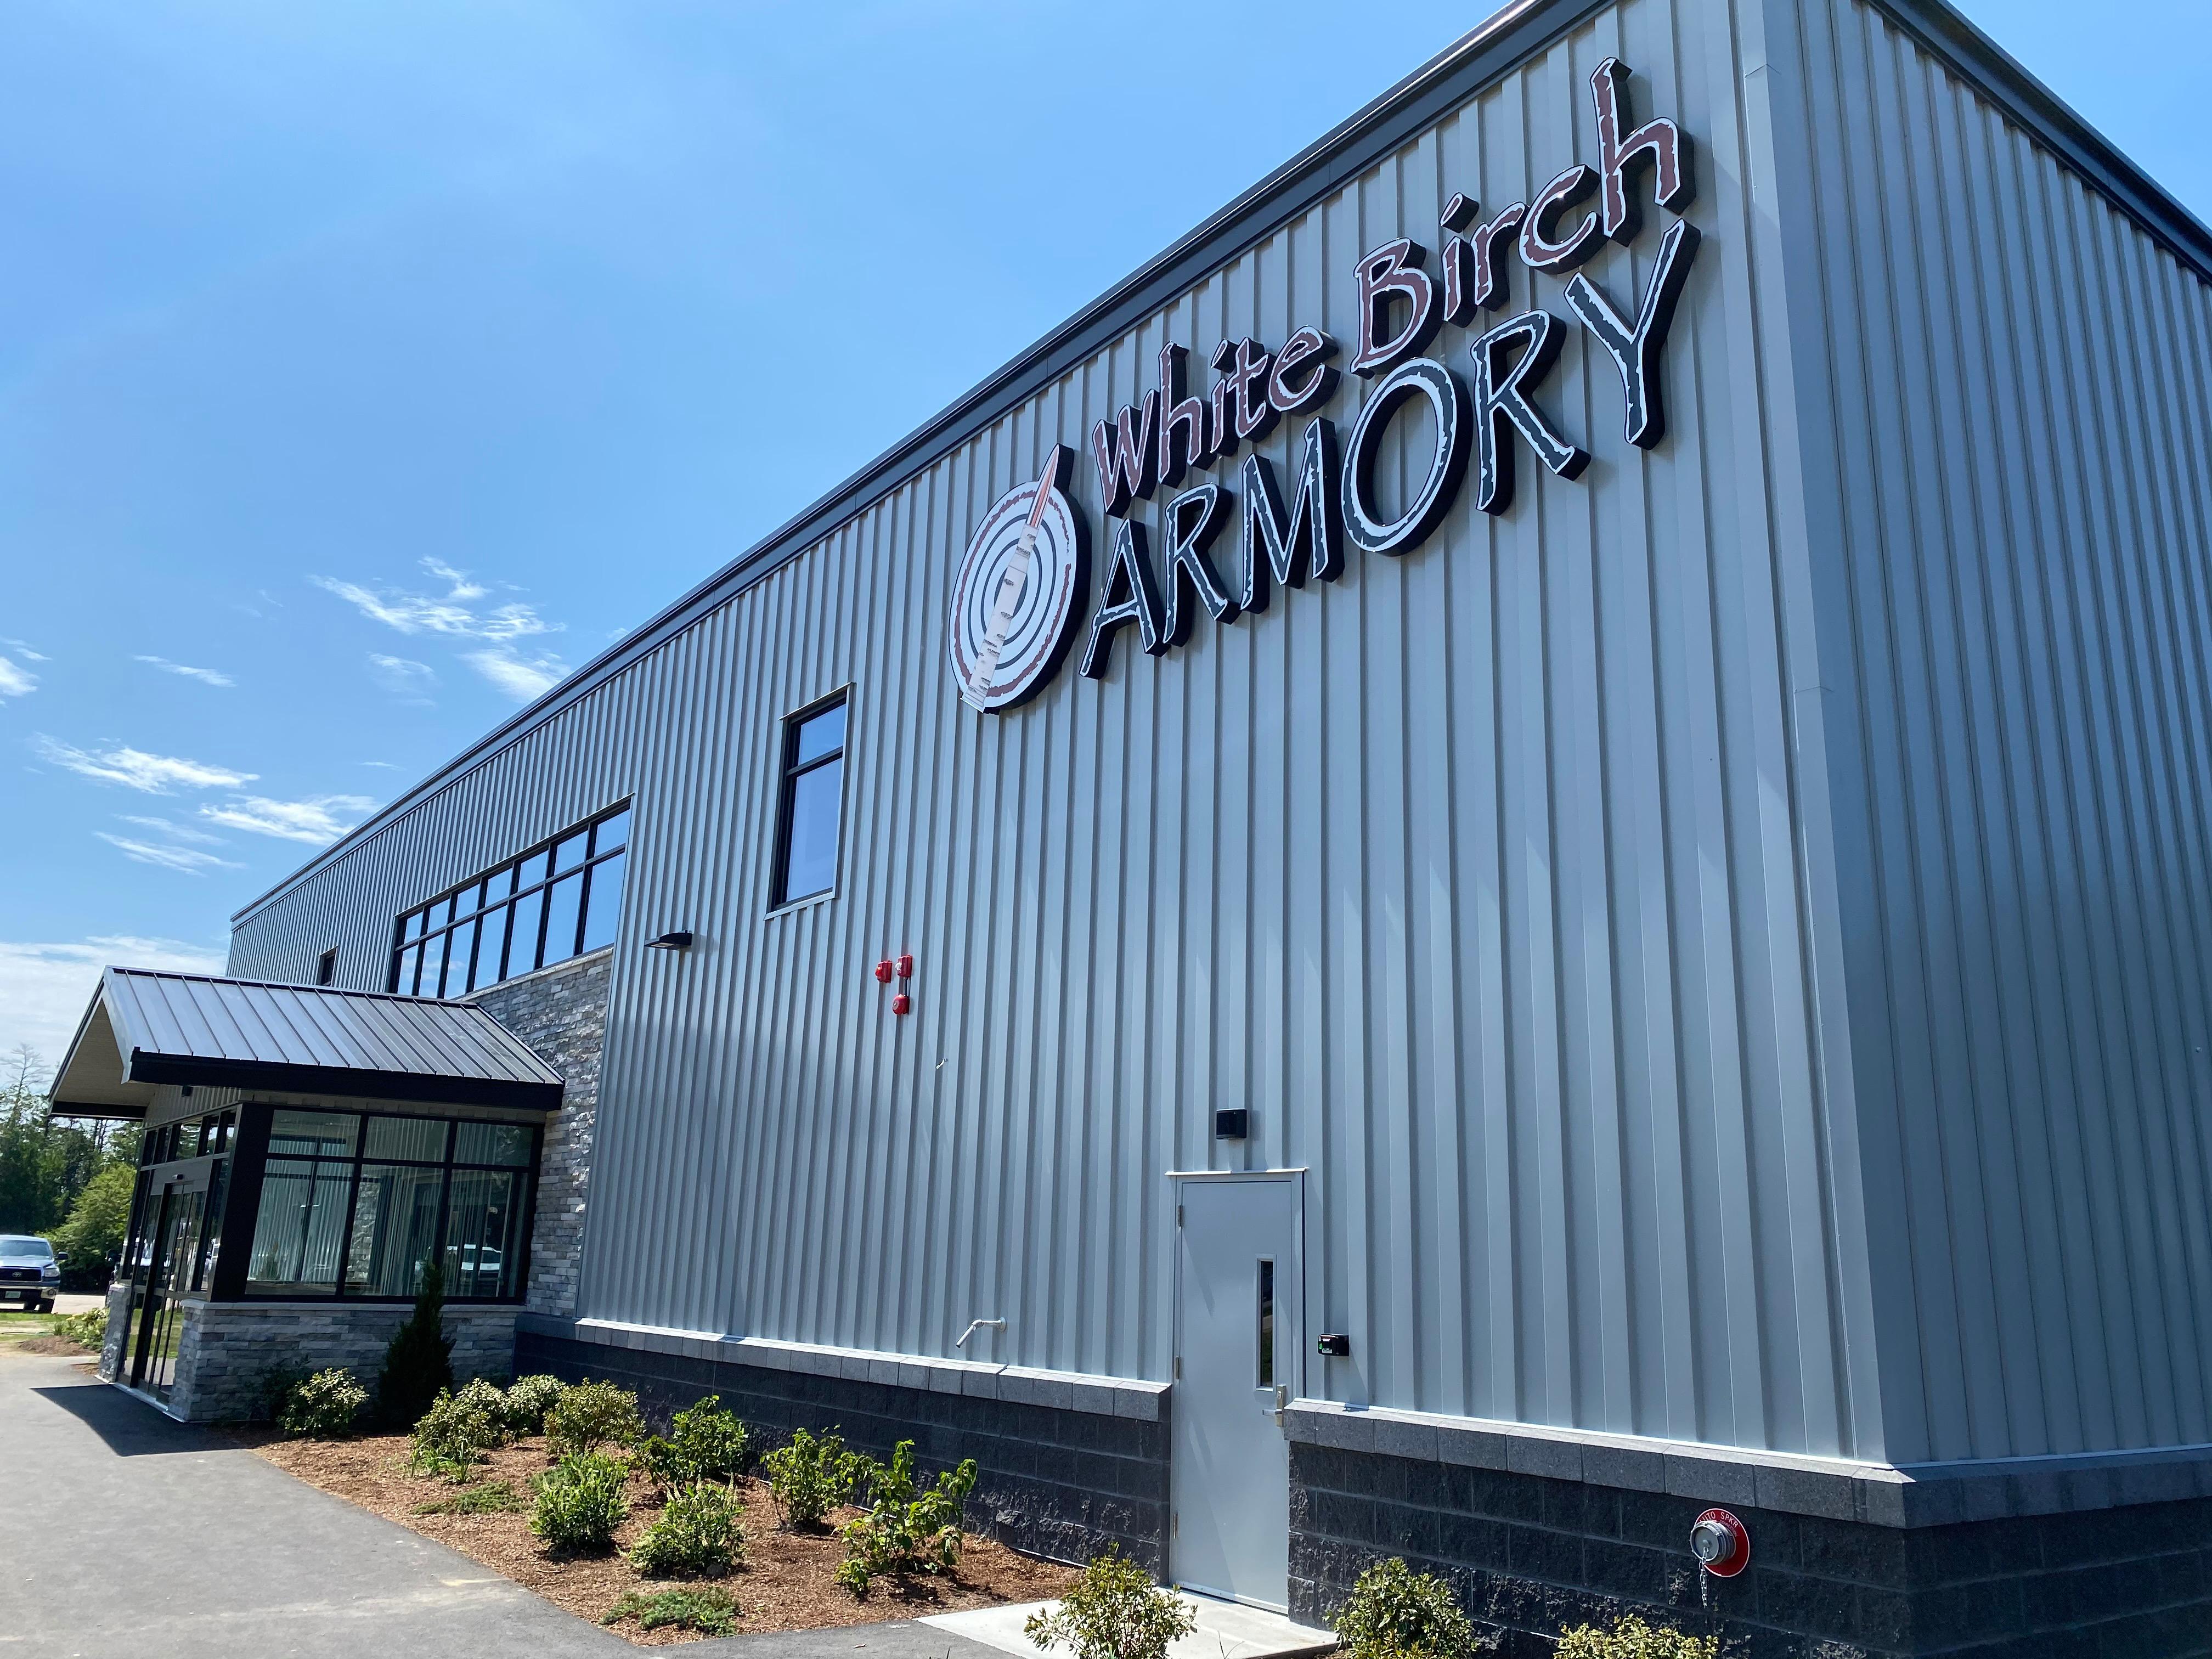 White Birch Armory Coupons near me in Dover, NH 03820 8coupons